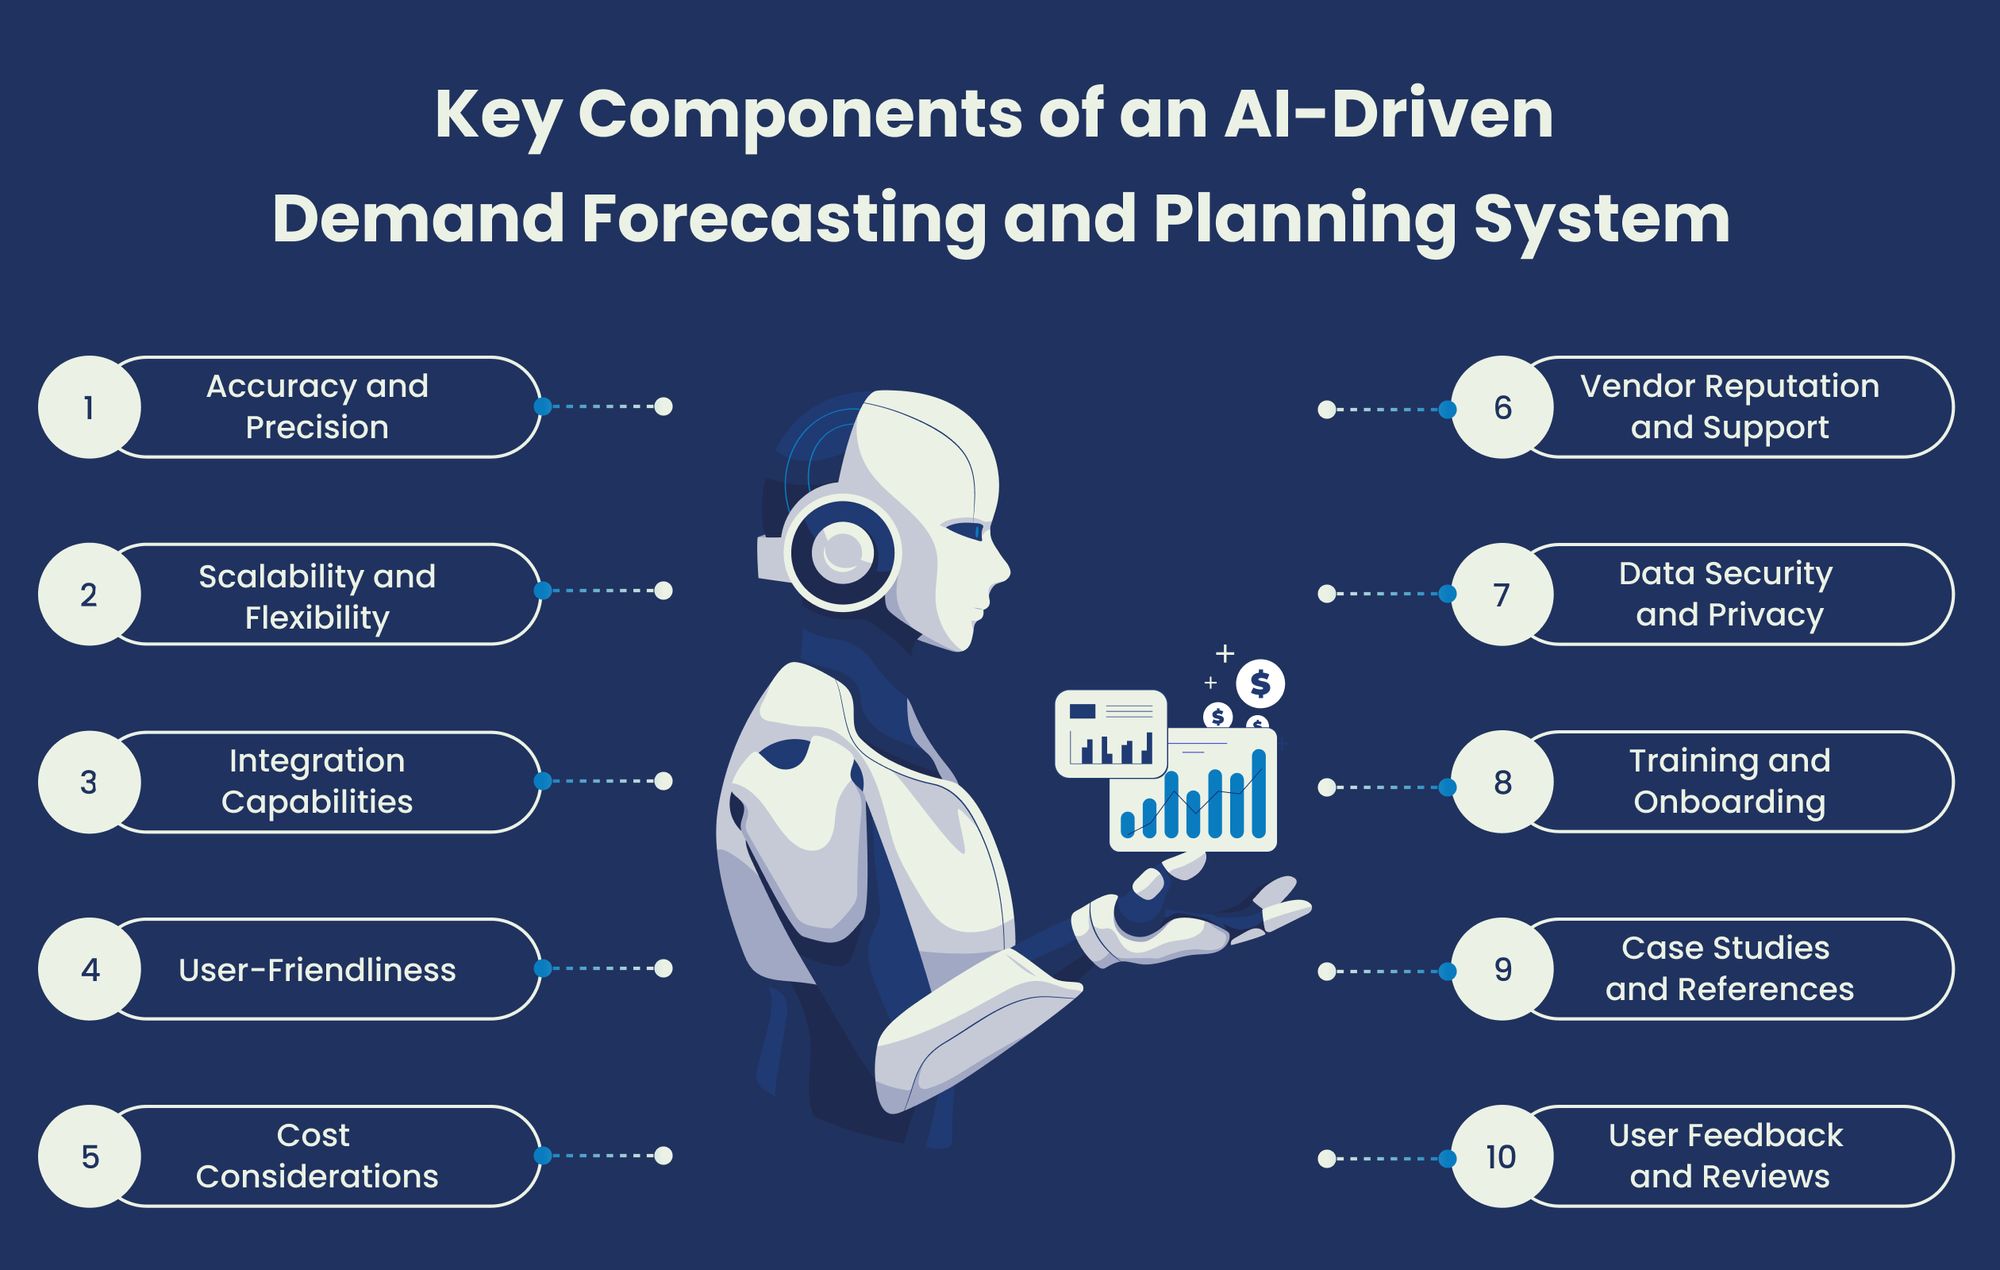 Key Components of an AI-Driven Demand Forecasting and Planning System